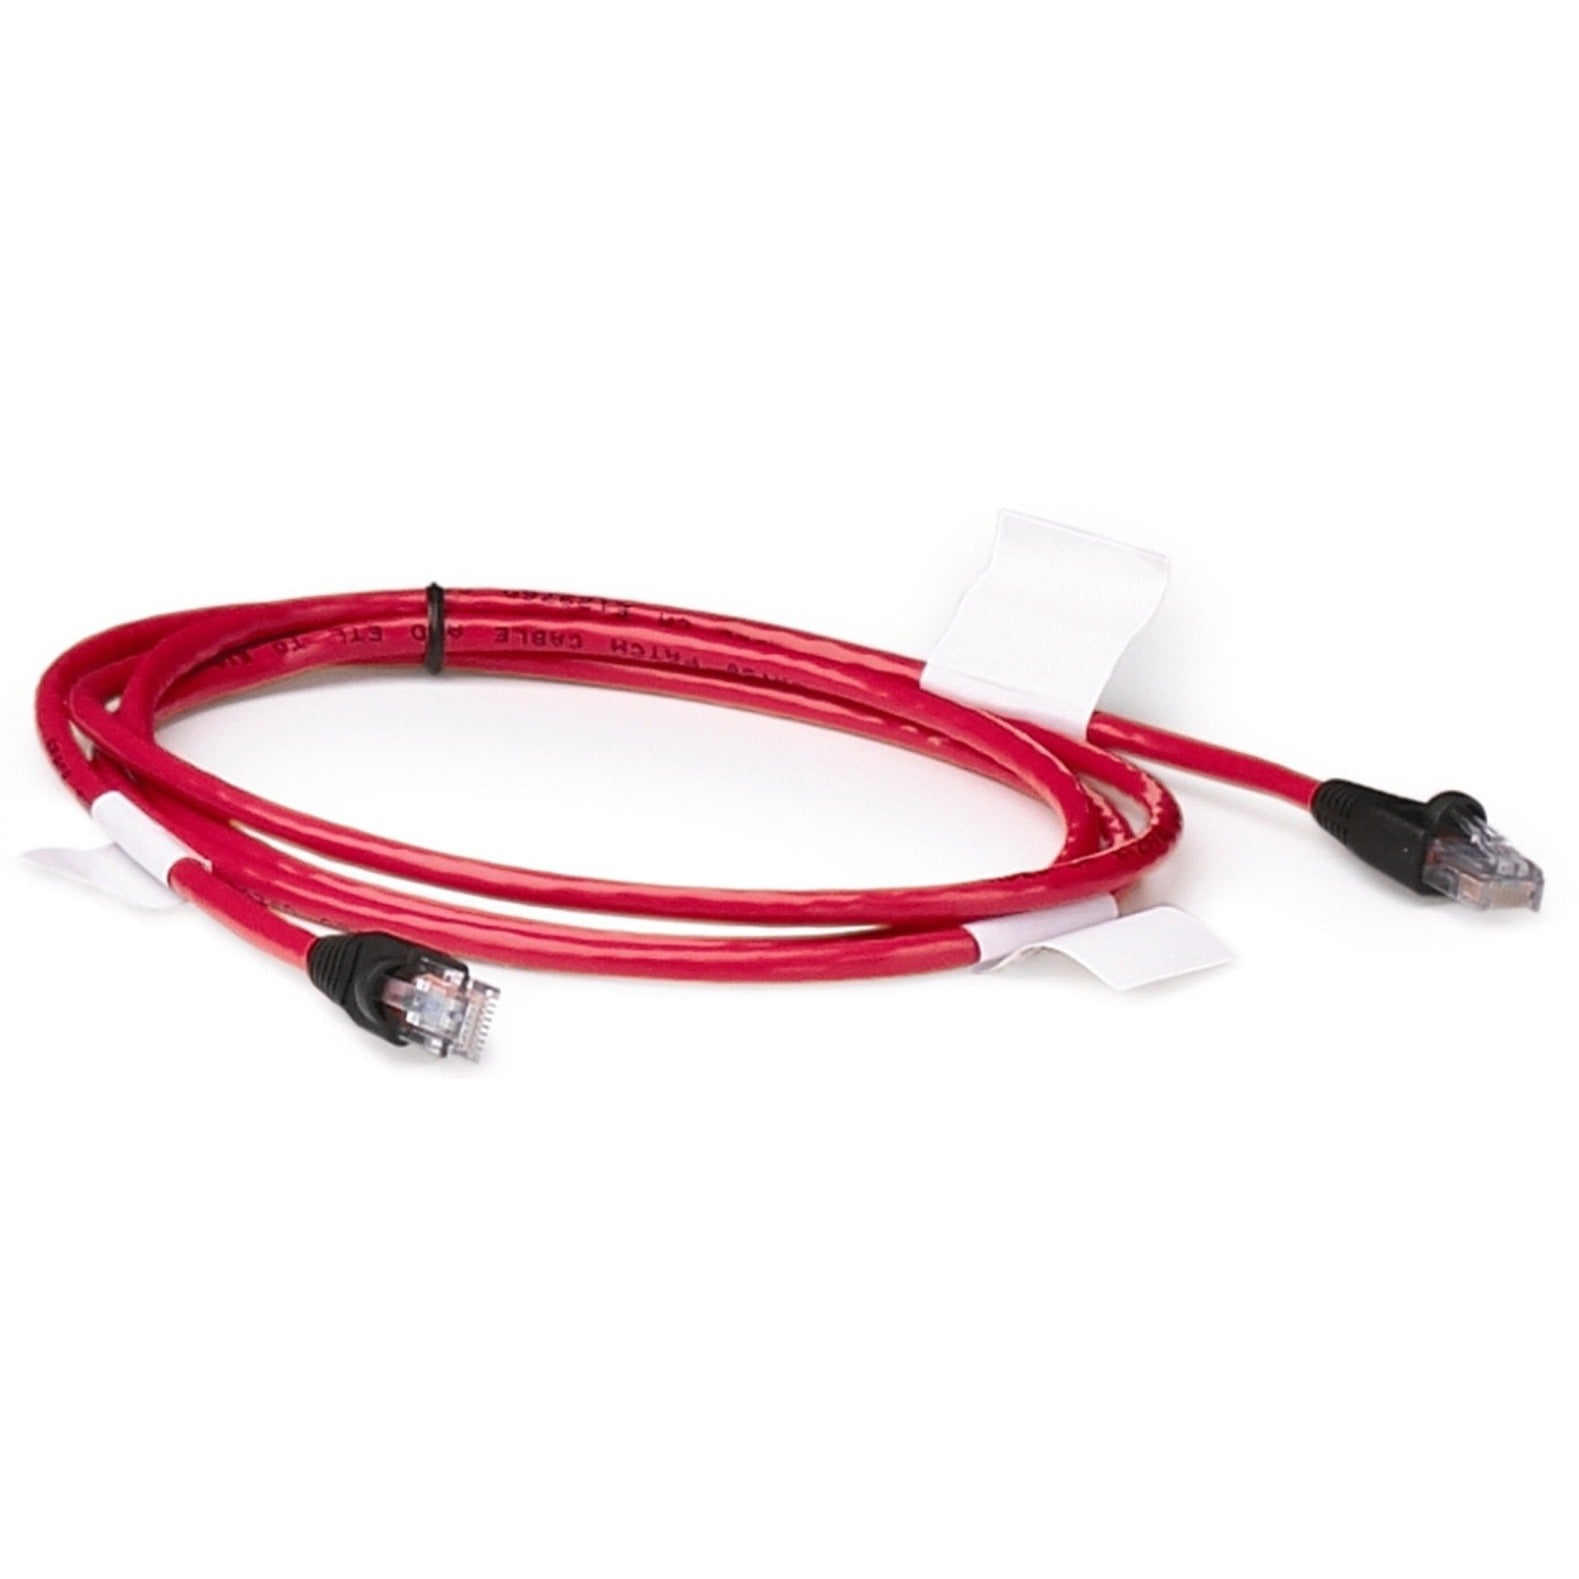 HPE 263474-B22 Cat5 Patch Cable, 6 ft, Copper Conductor, Red